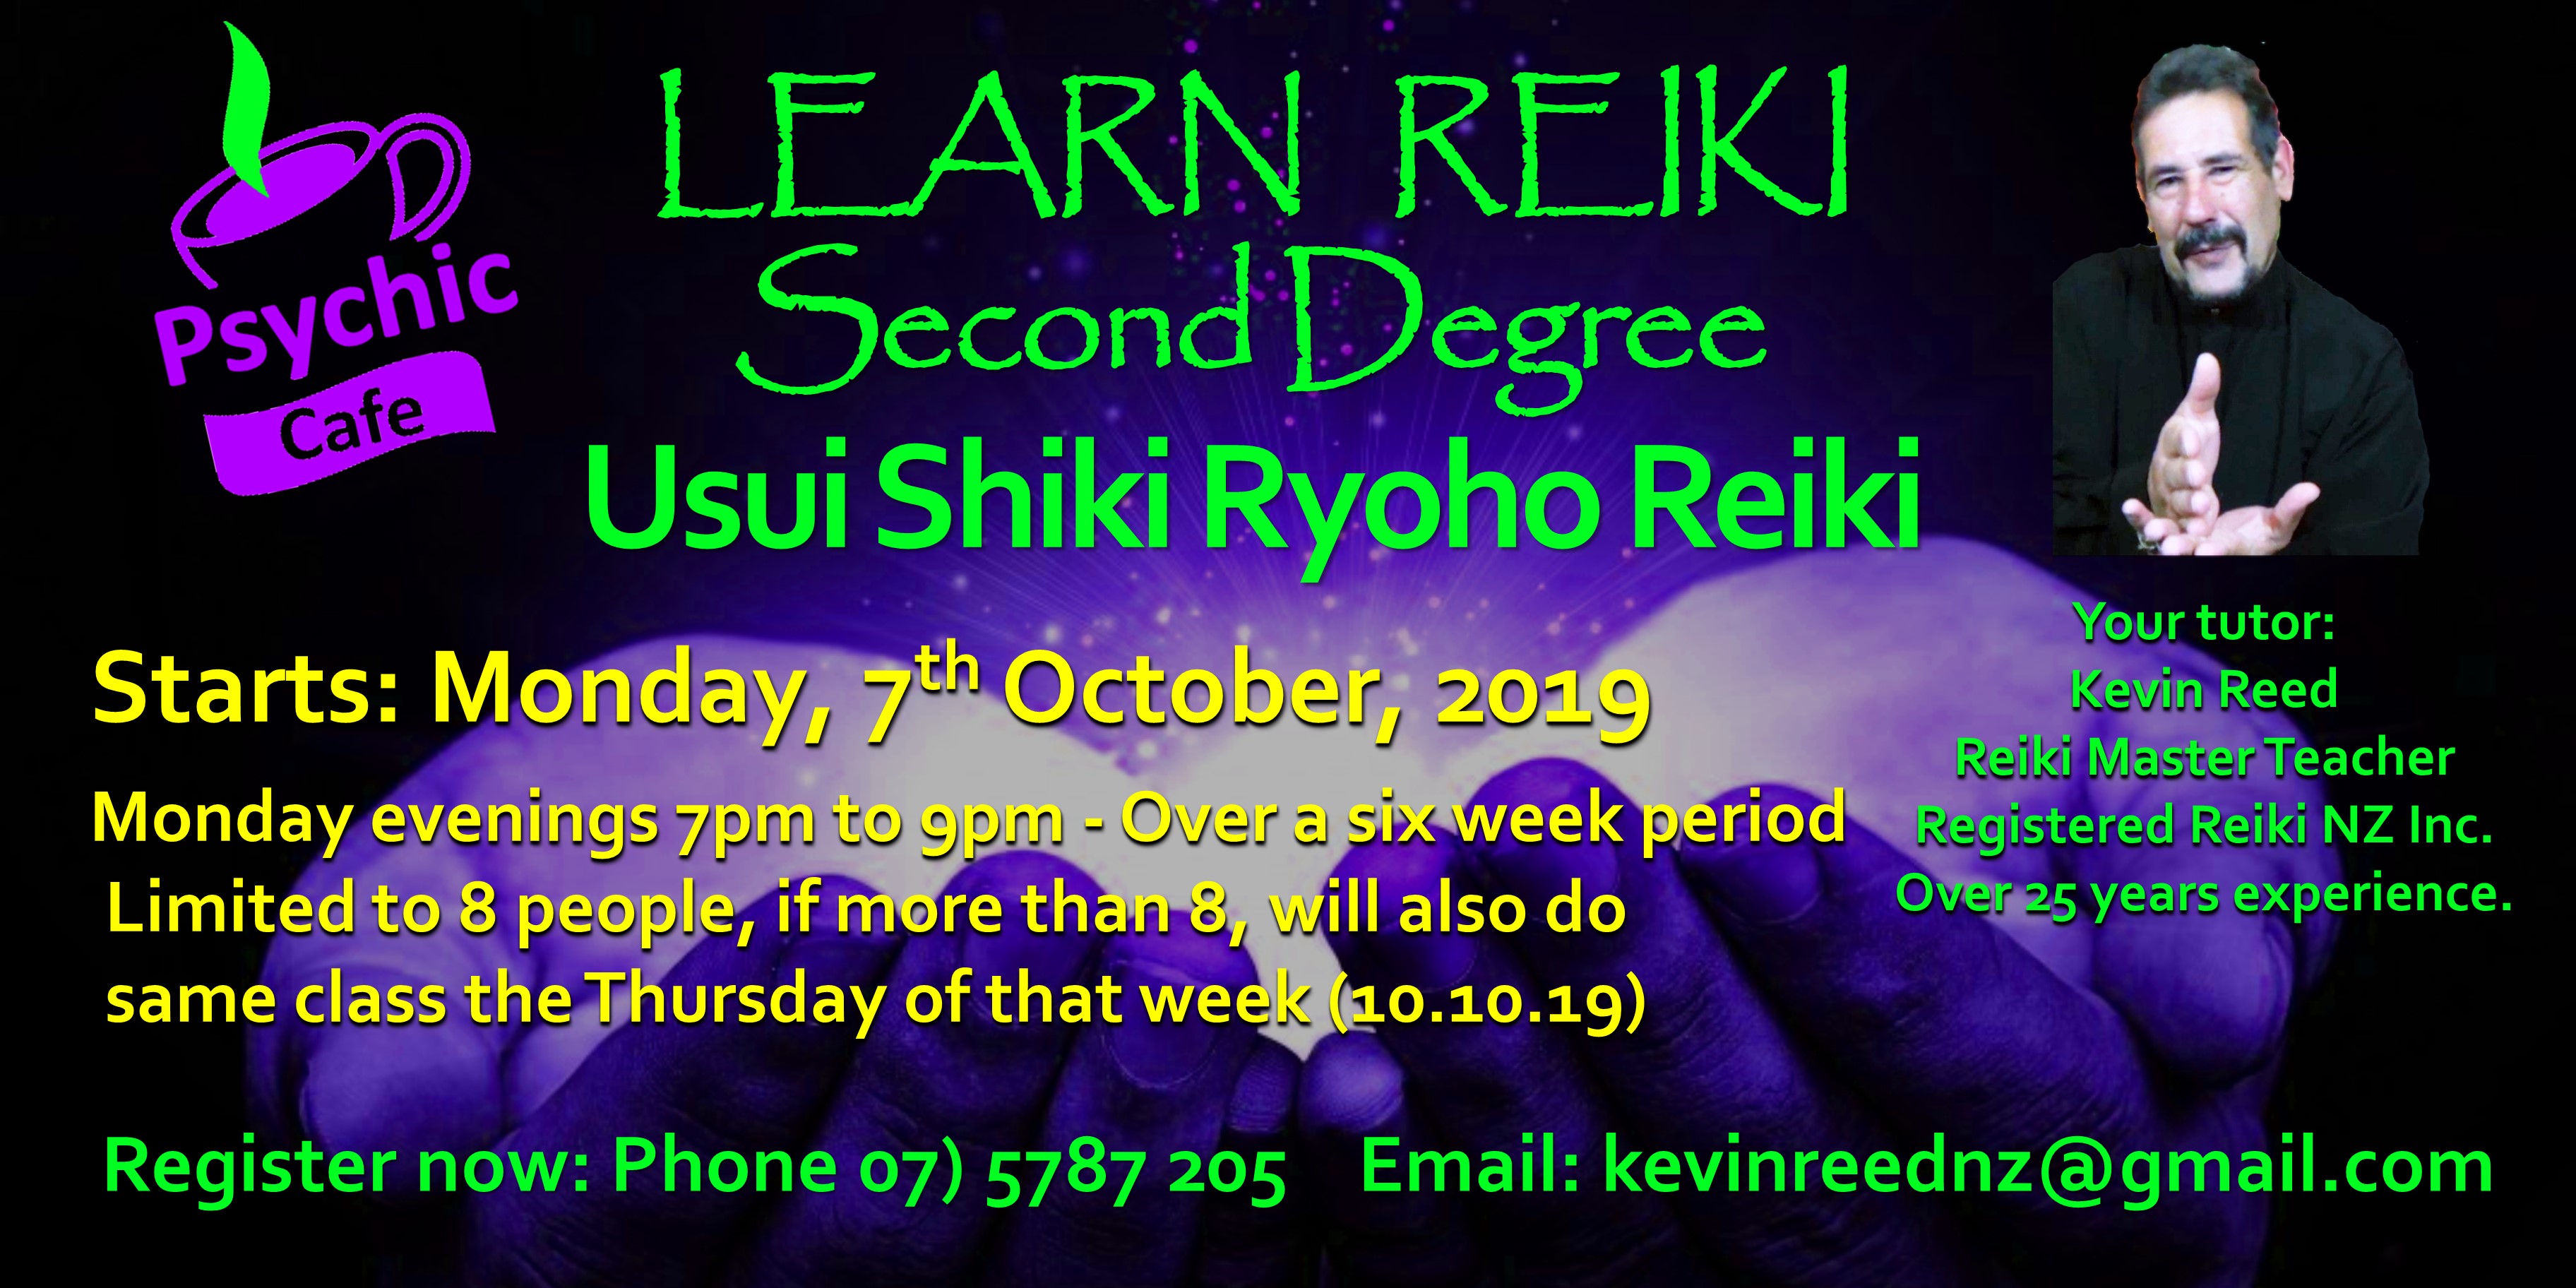 You are currently viewing Second Degree Reiki Class